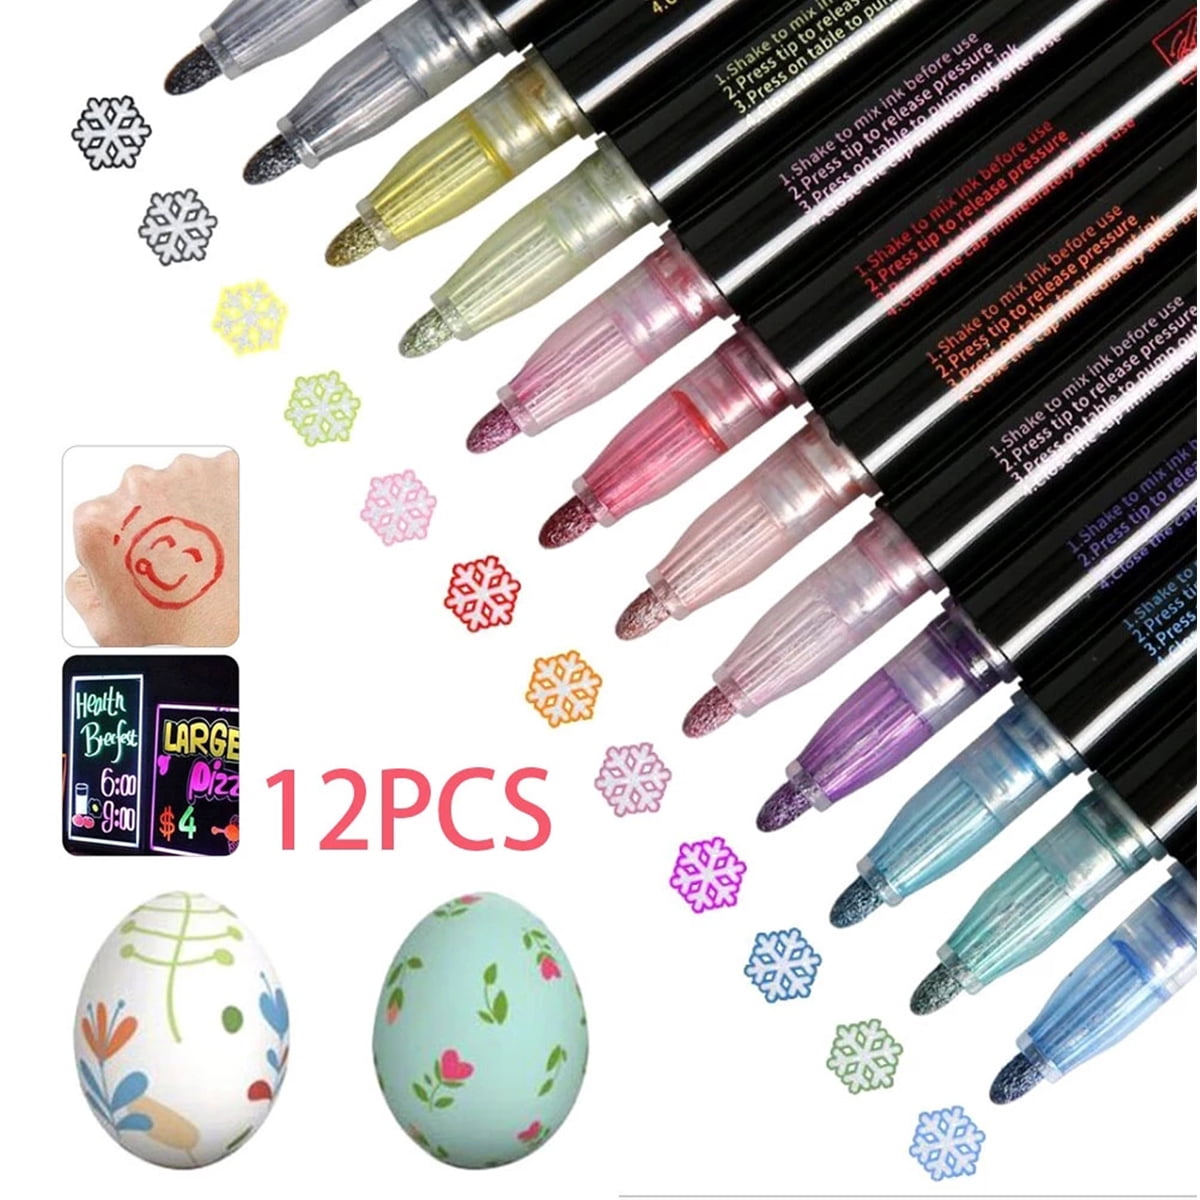  TaKicola Super Squiggles Outline Markers Set, Double Line  Shimmer Markers, Self-Outline Metallic Markers Glitter Writing Drawing  Doodle Marker (24 Color Pens) : Arts, Crafts & Sewing